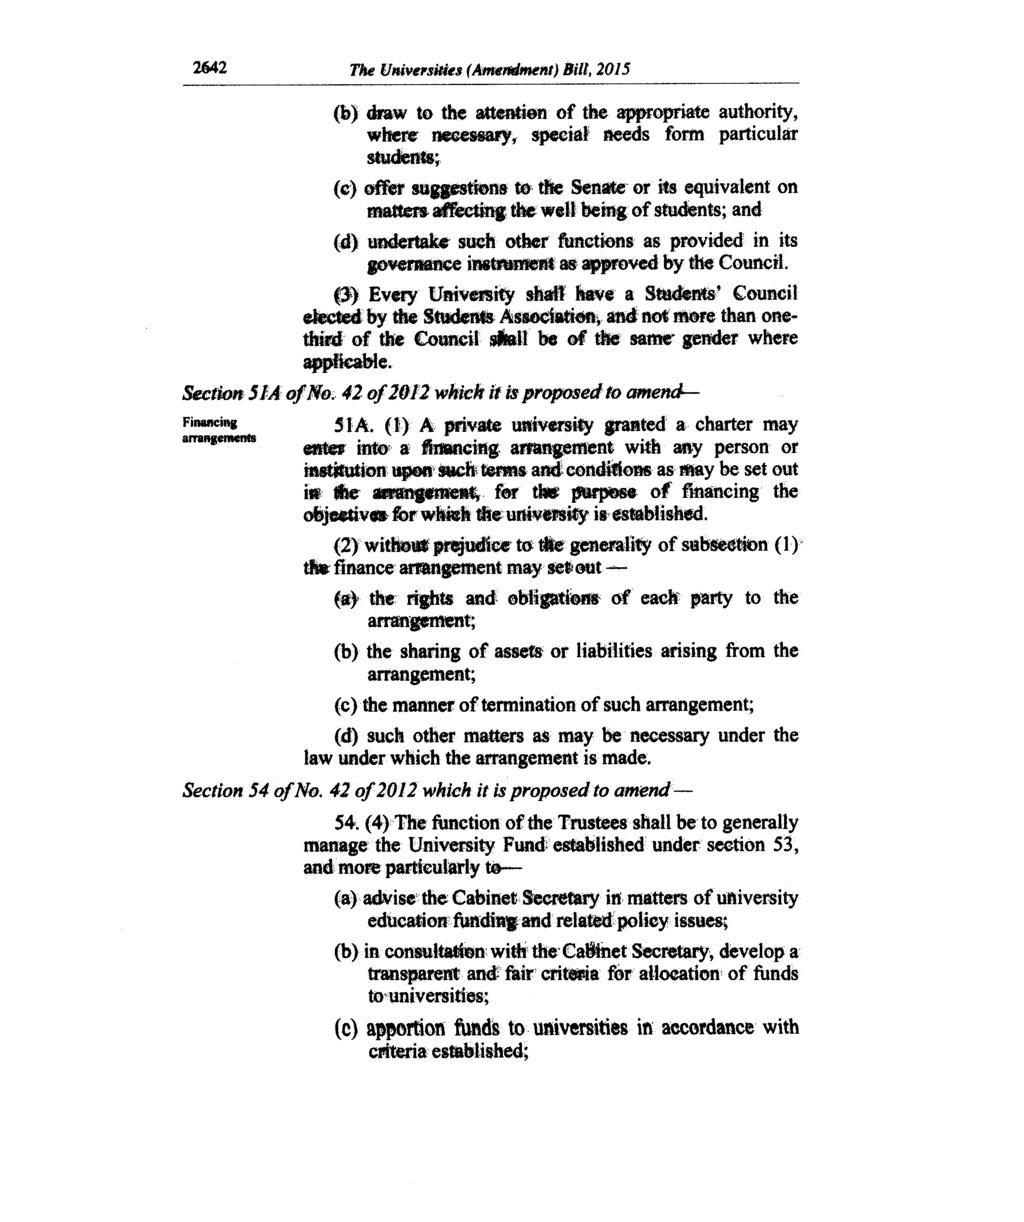 2642 The Universities (Amendment) Bill, 2015 (b) draw to the attention of the appropriate authority, when necessary, special needs form particular students; (c) offer suggestions to the Senate or its